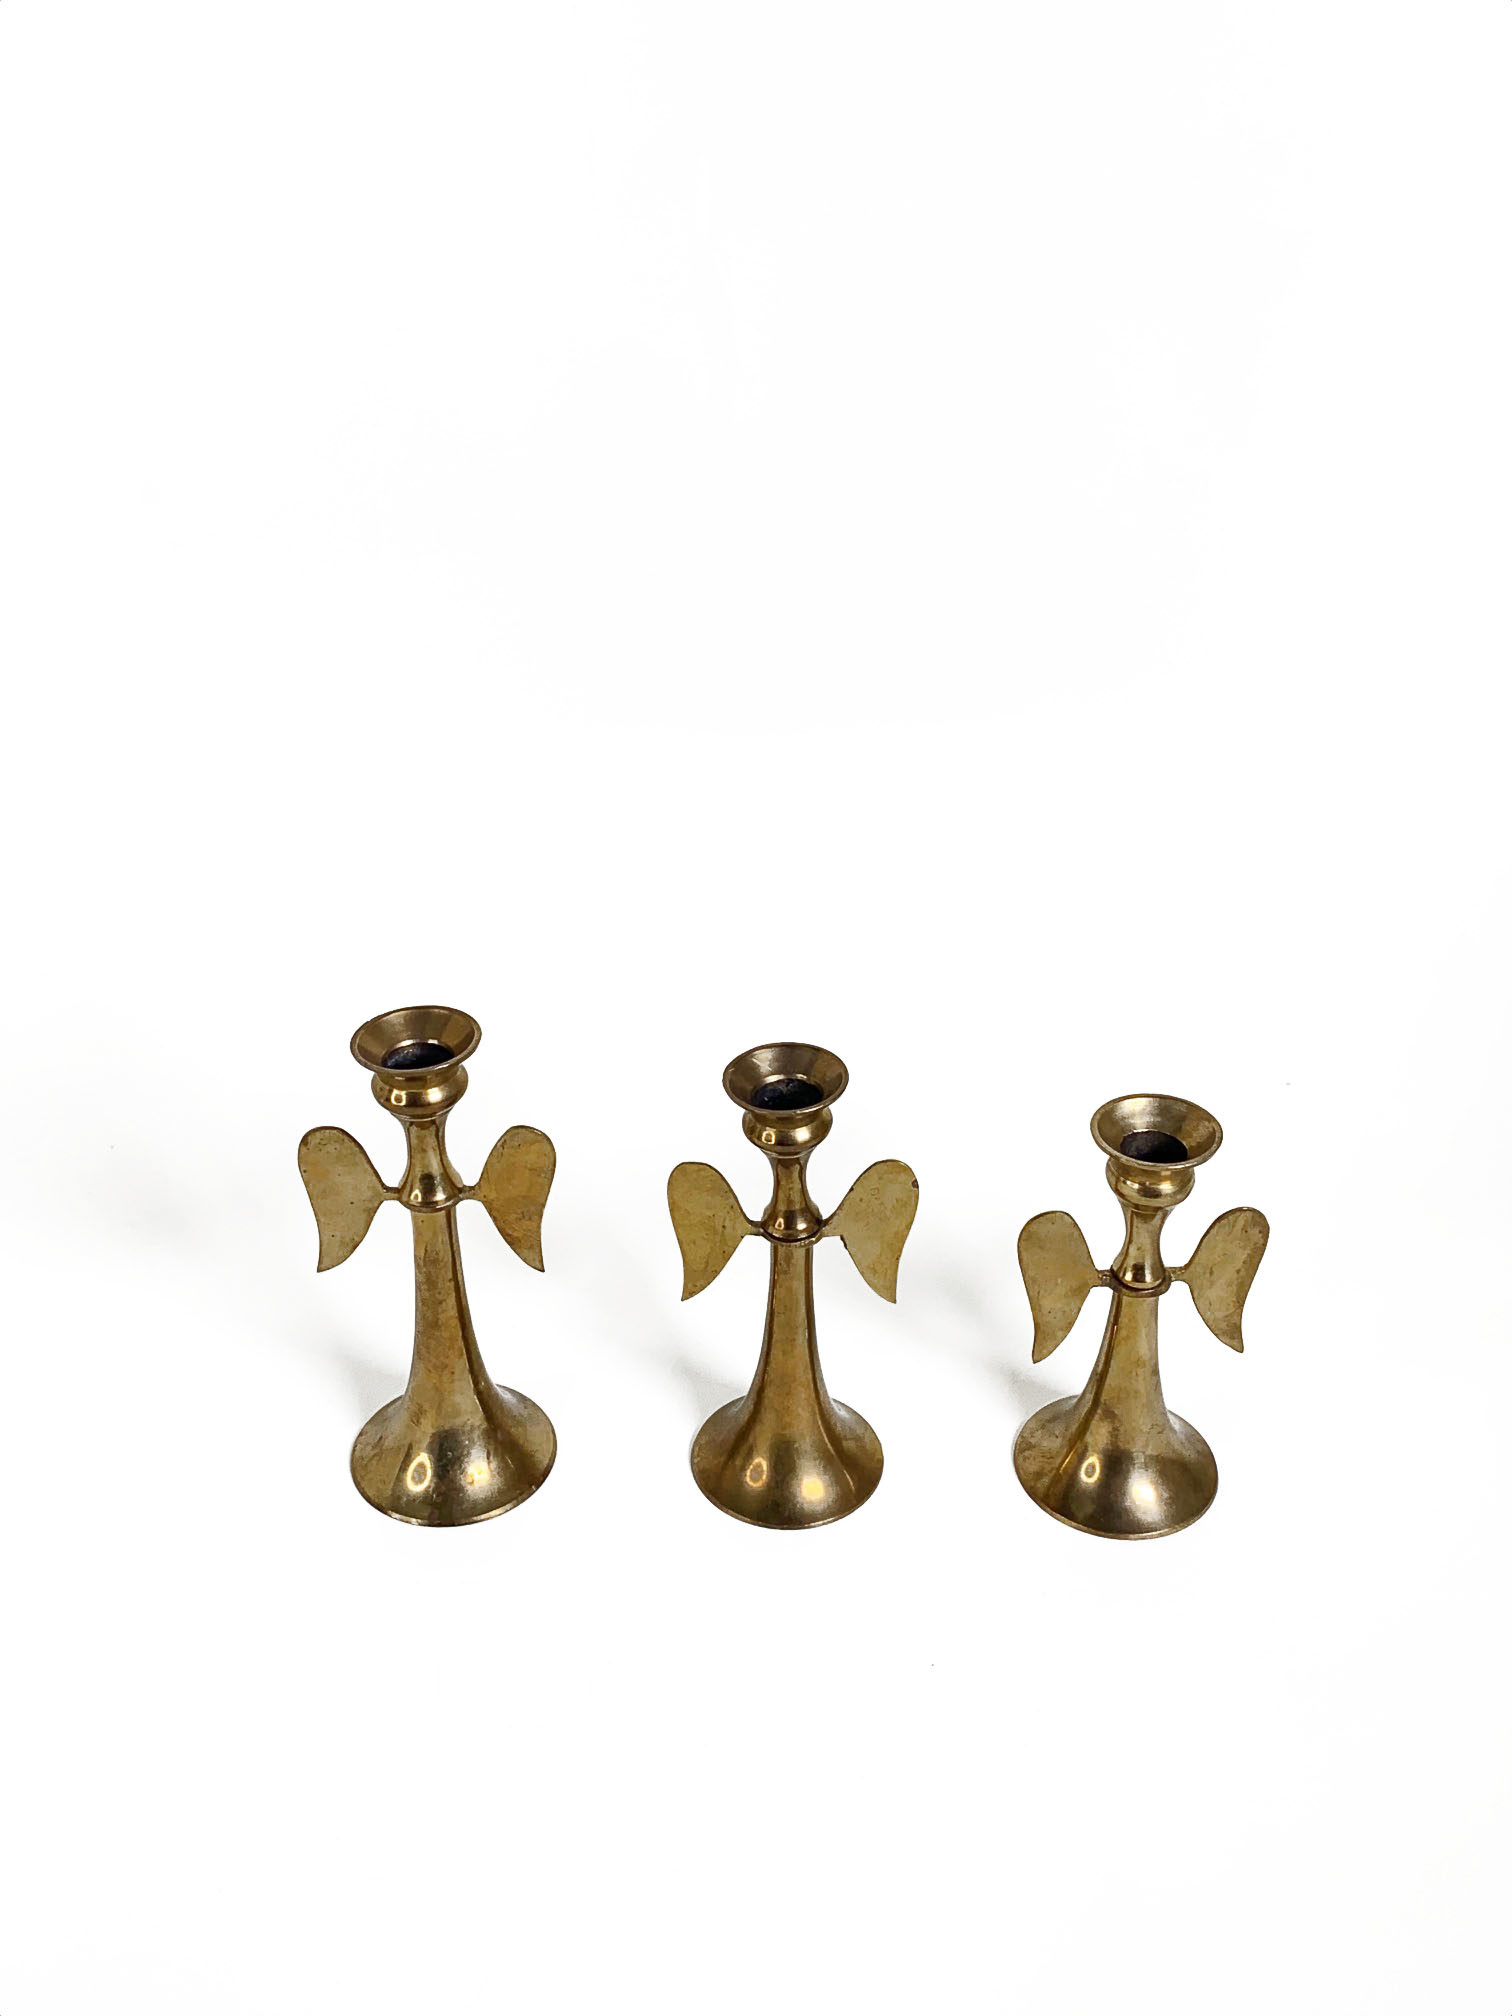 Vintage set of three brass angel wings candle holders - Curiosa Cabinet